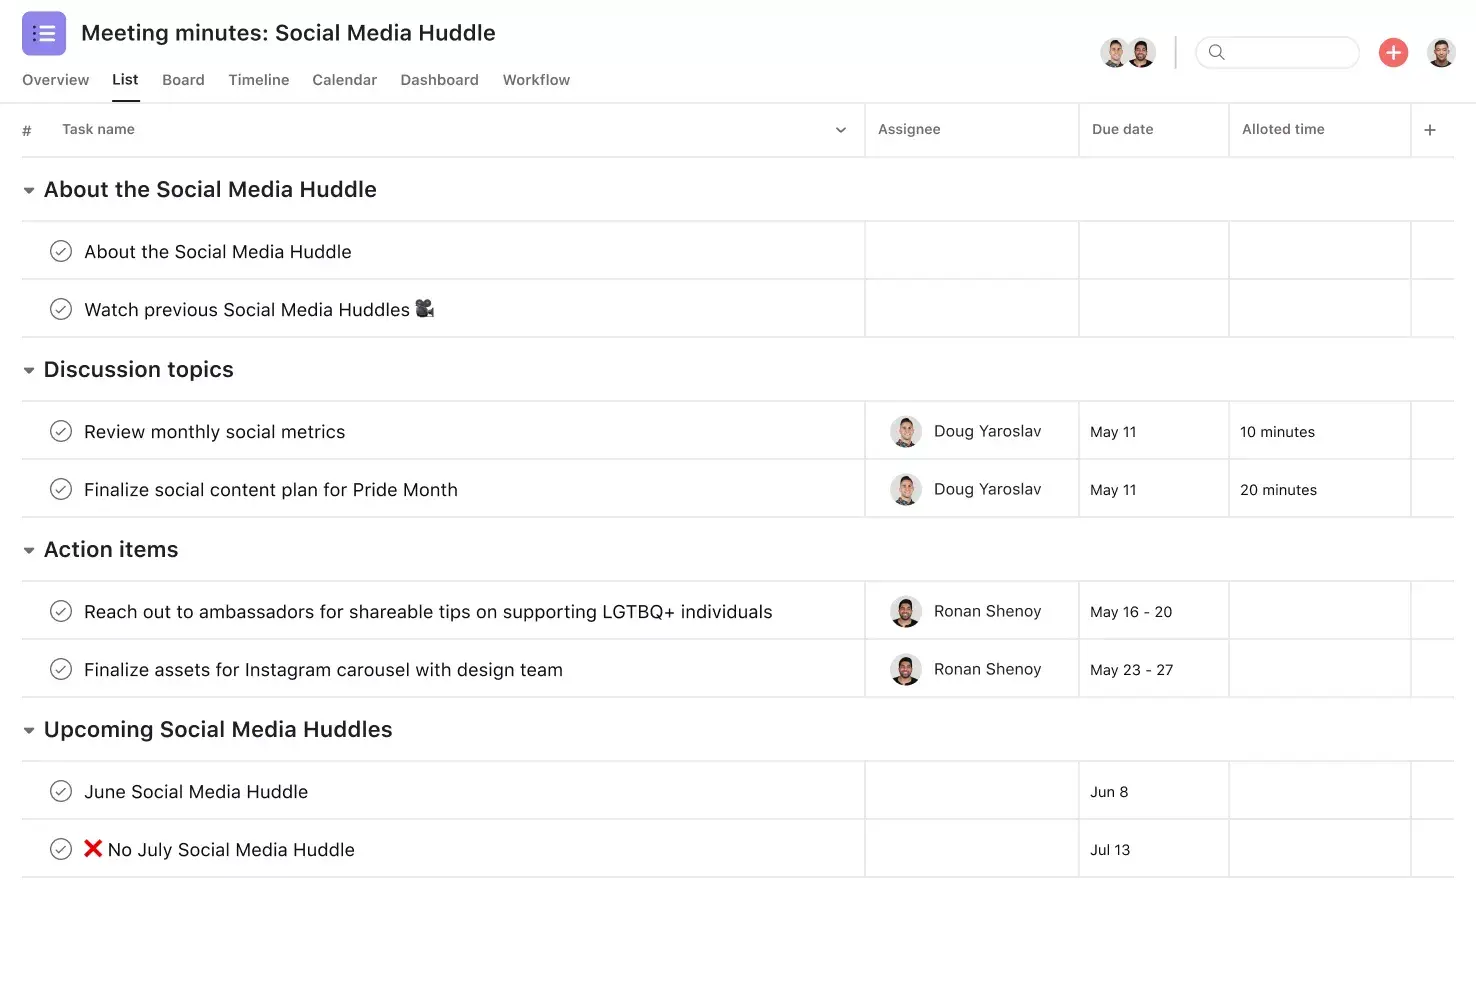 [Product ui] Meeting minutes project in Asana, spreadsheet-style project view (List)